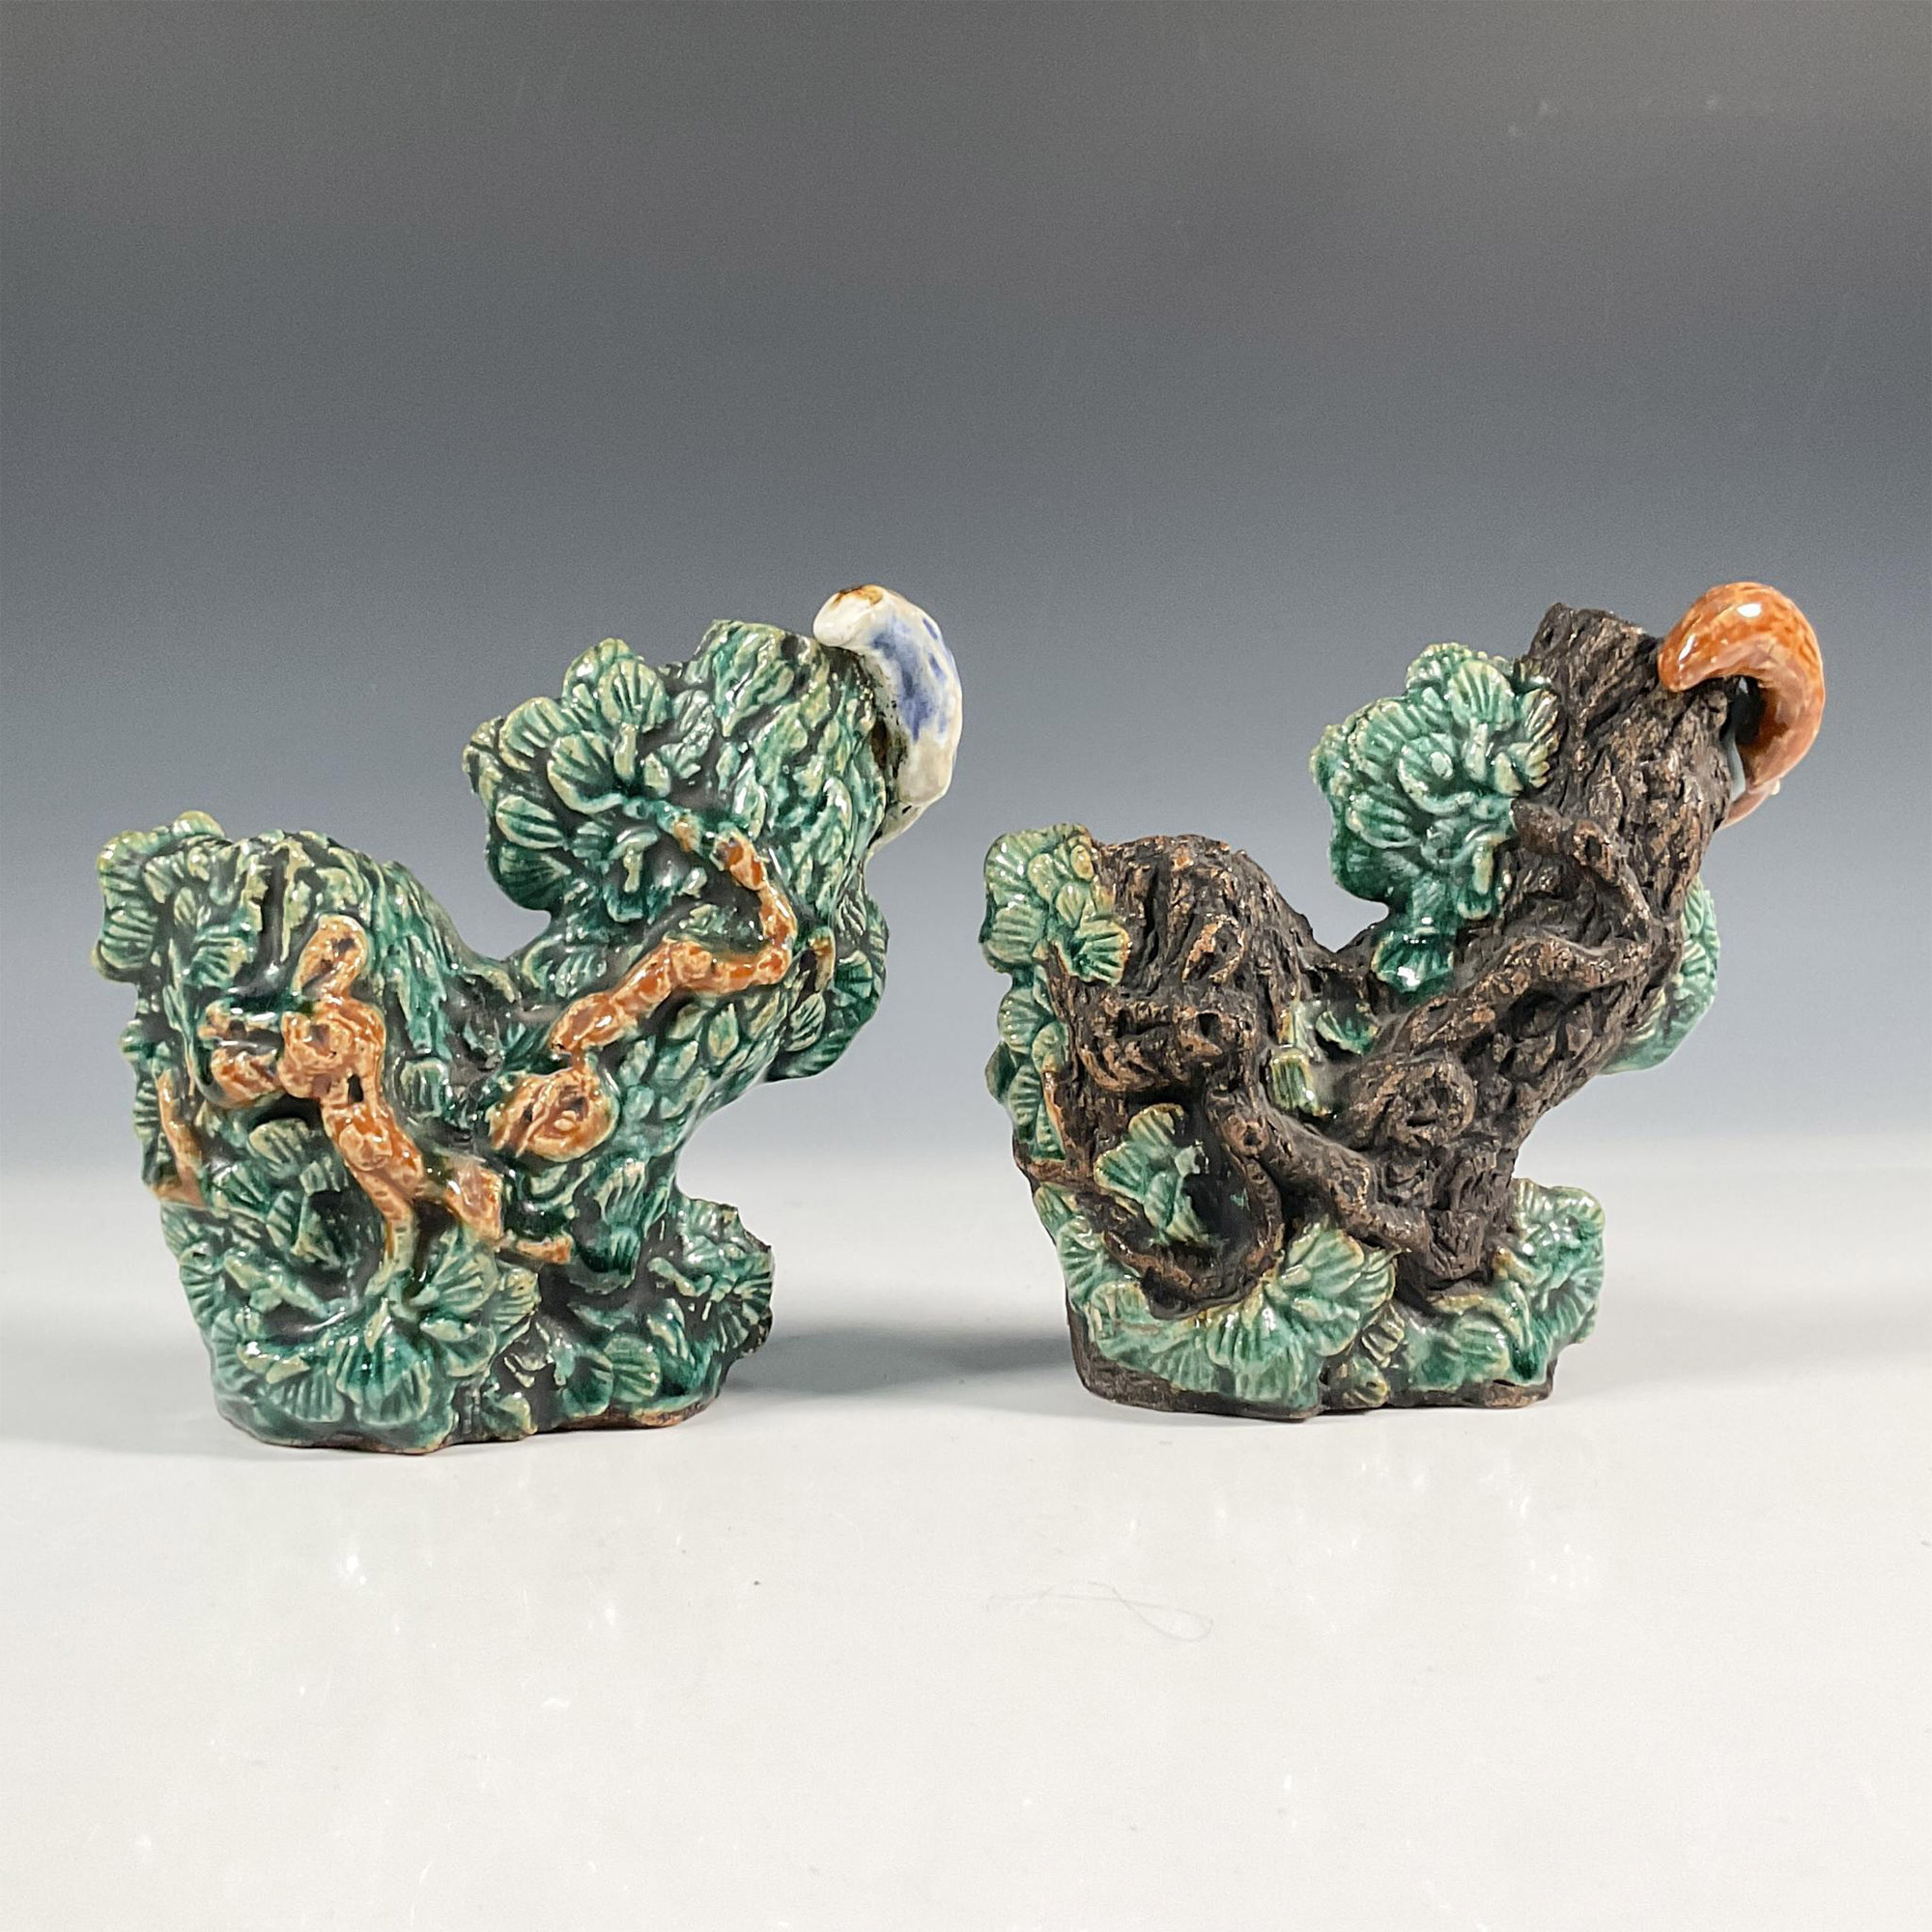 Pair of Majolica Glazed Porcelain Candle Holders - Image 3 of 4